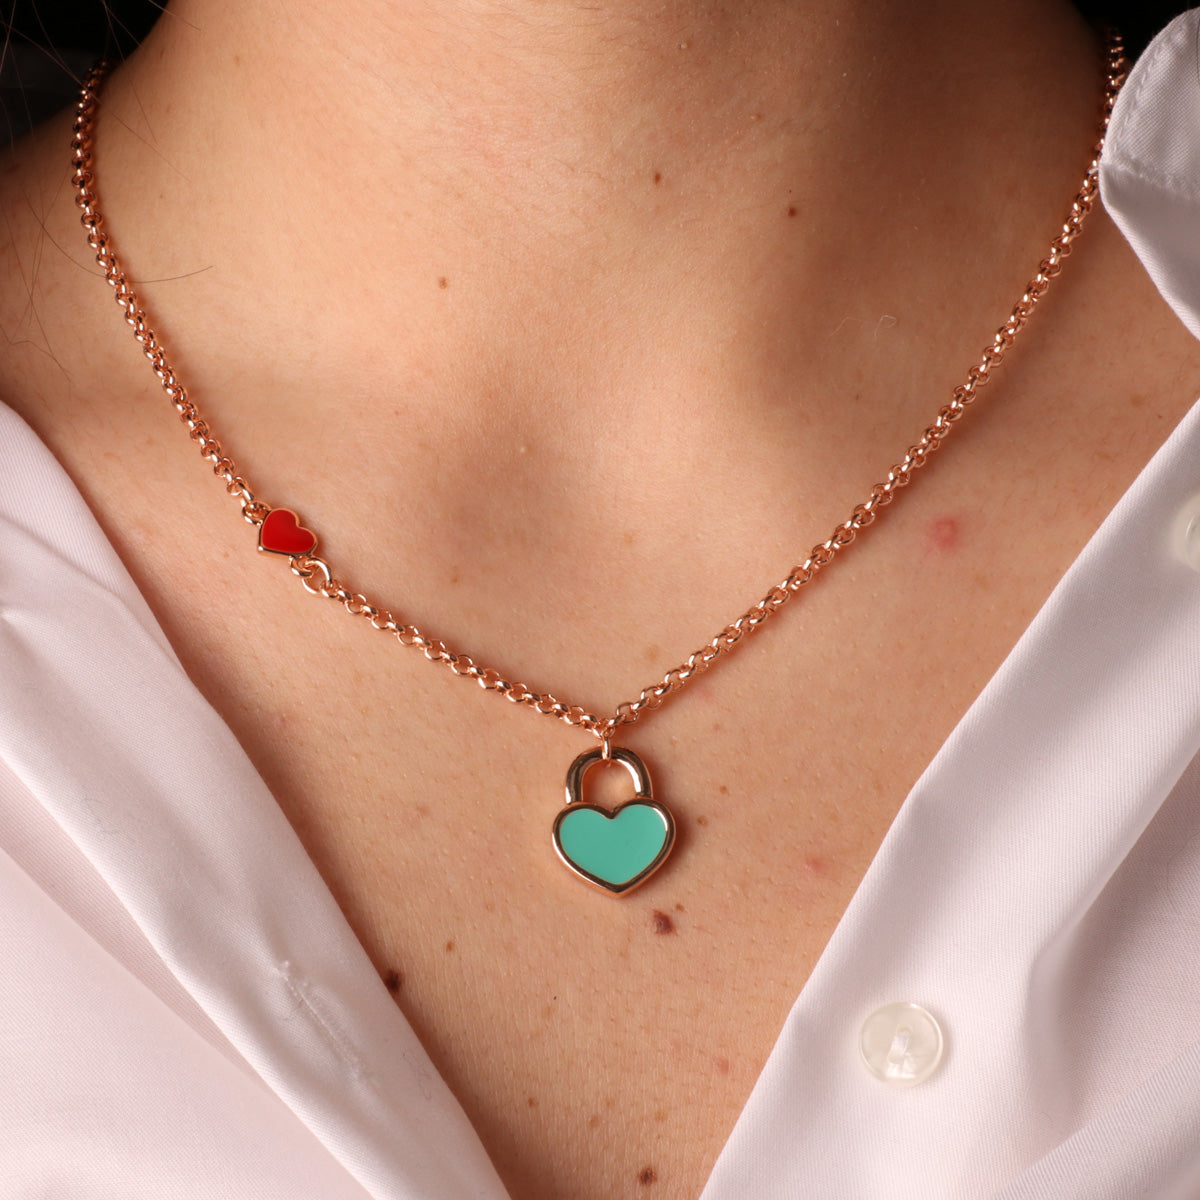 Metal necklace with red heart and heart padlock with turquoise nail polish